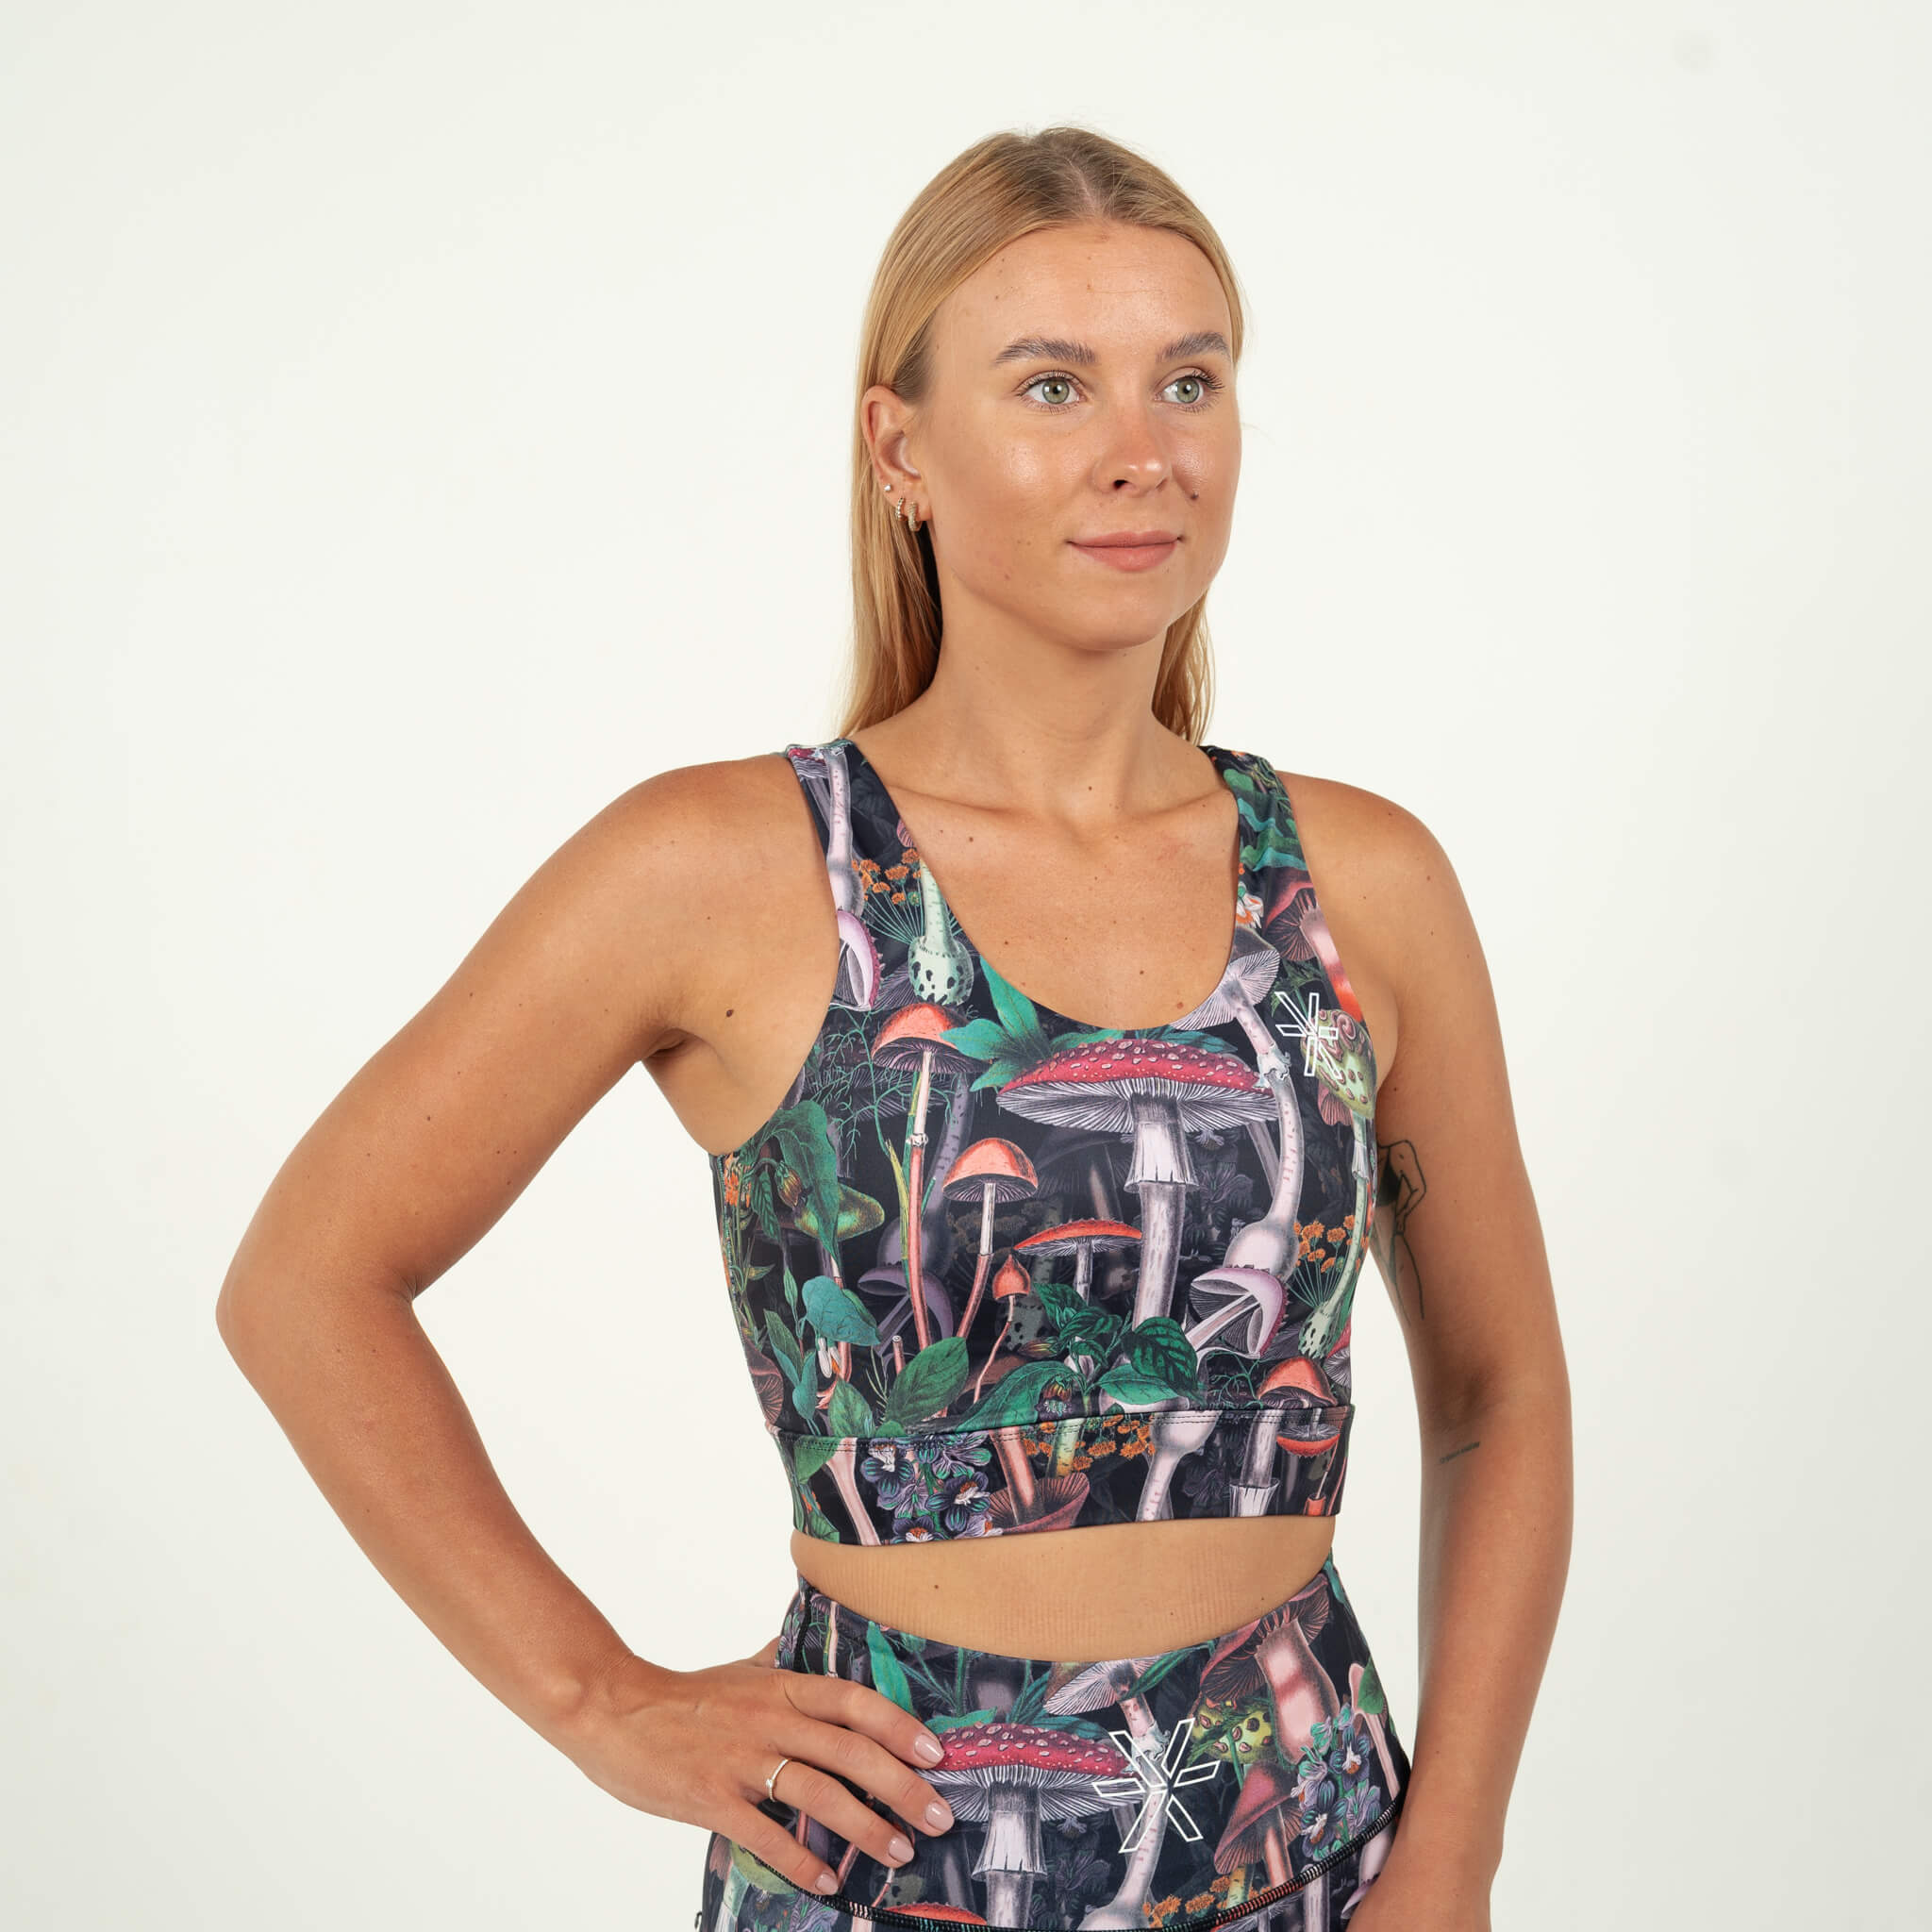 Women's - Sport Bras or Sleeveless or Hoodies and Sweatshirts or Long  Sleeves or Shorts or Gloves or Dresses and Rompers or Headphones and  Watches in White or Brown